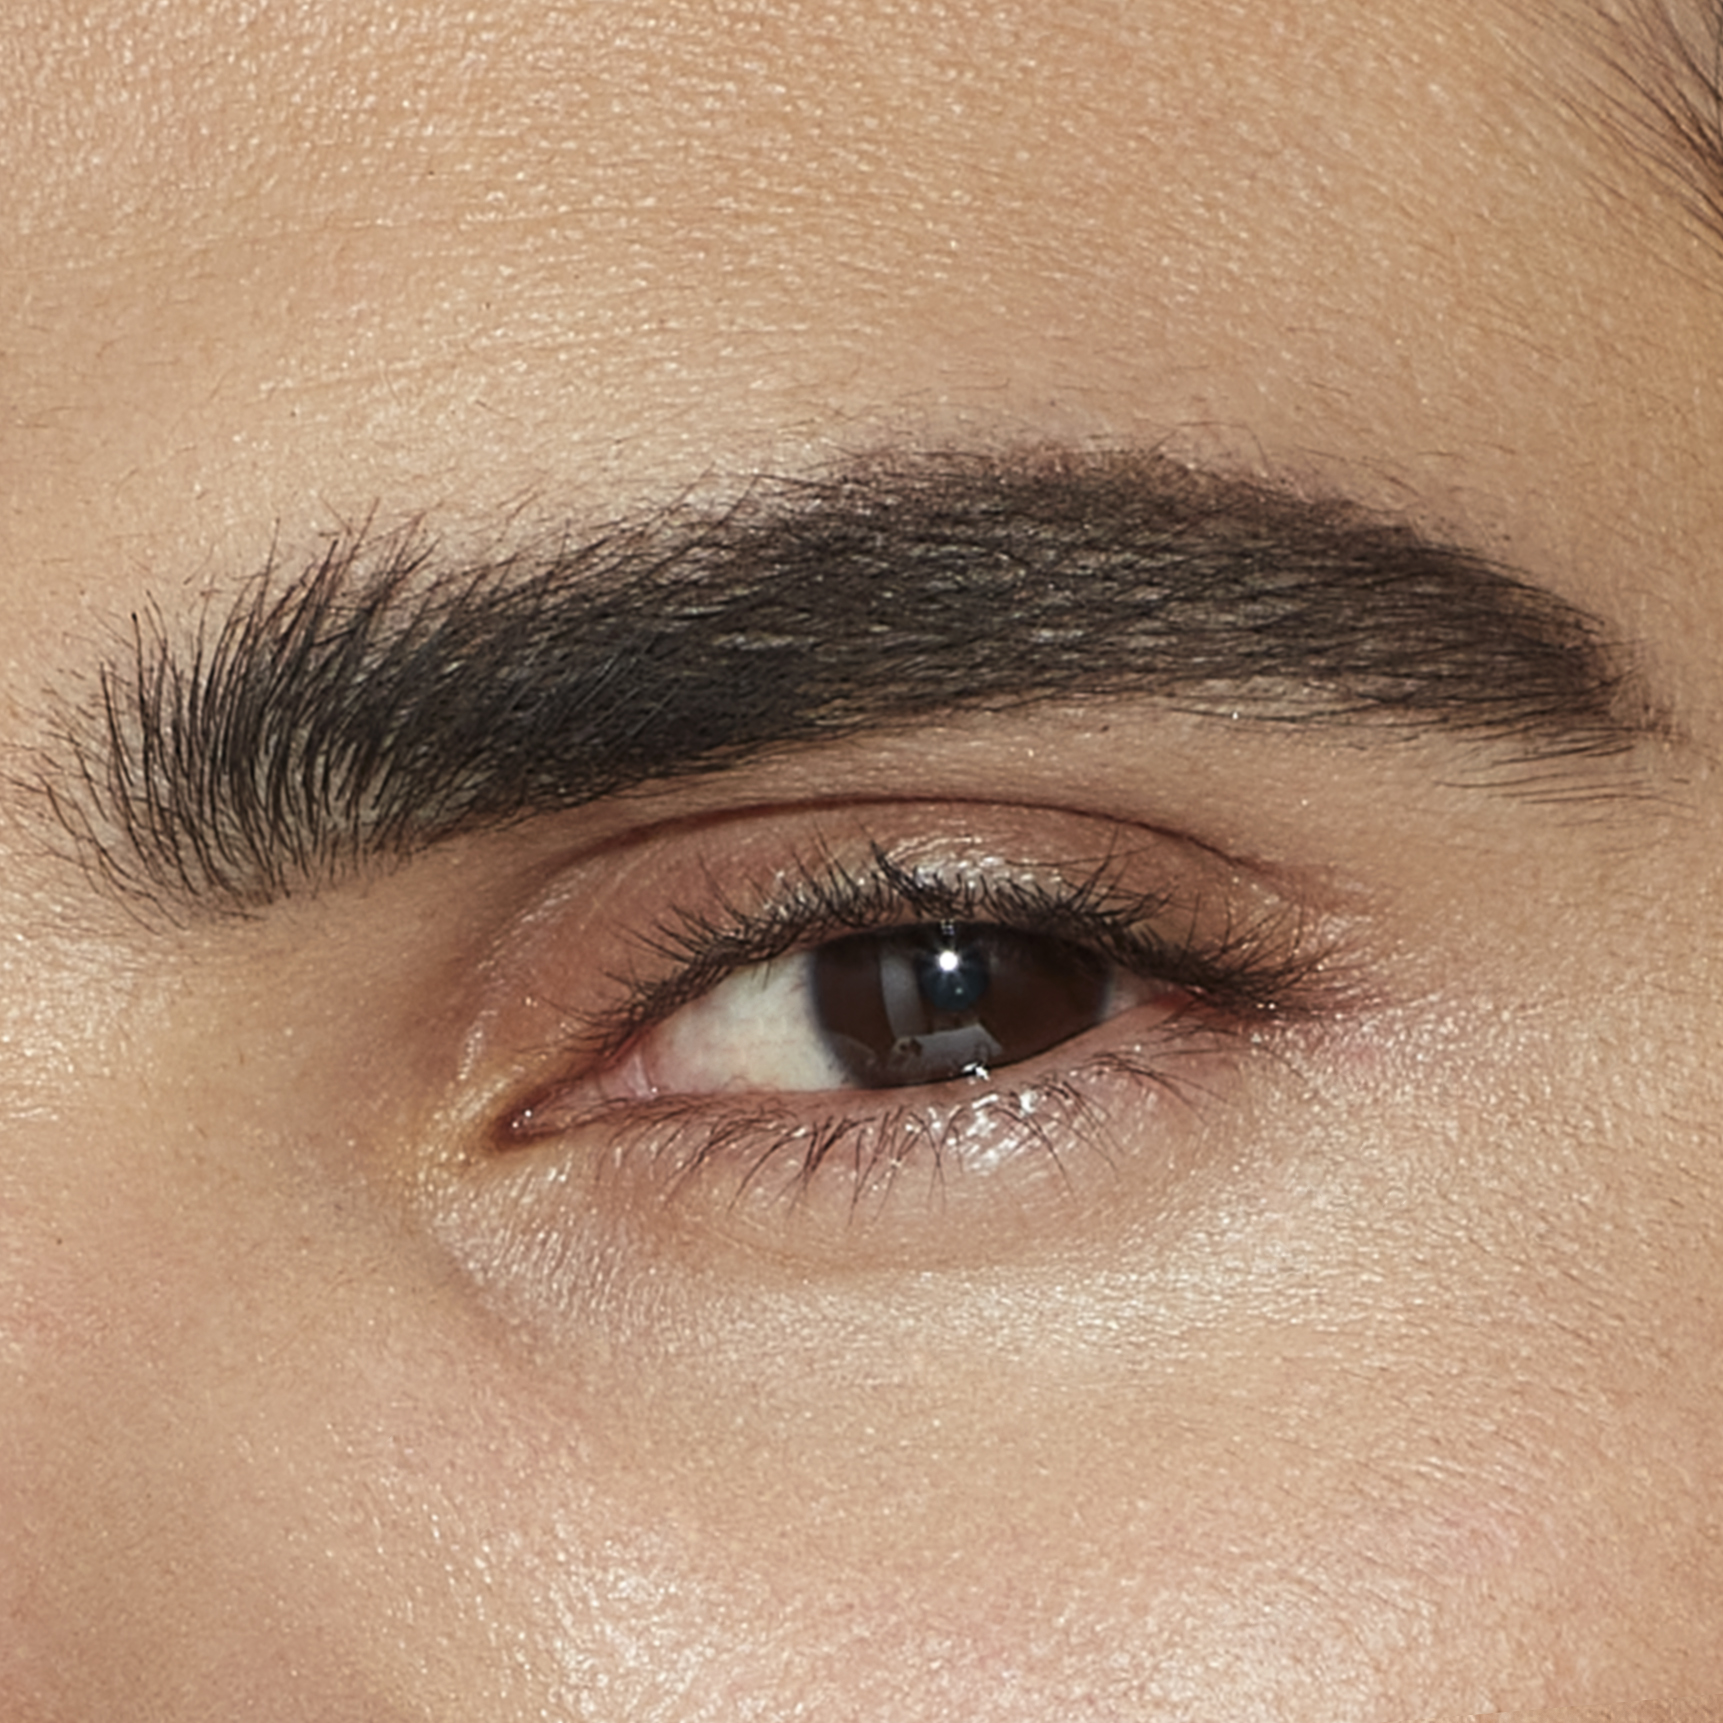 Brow Tutorial For Men: How To Make Eyebrows Look Thicker